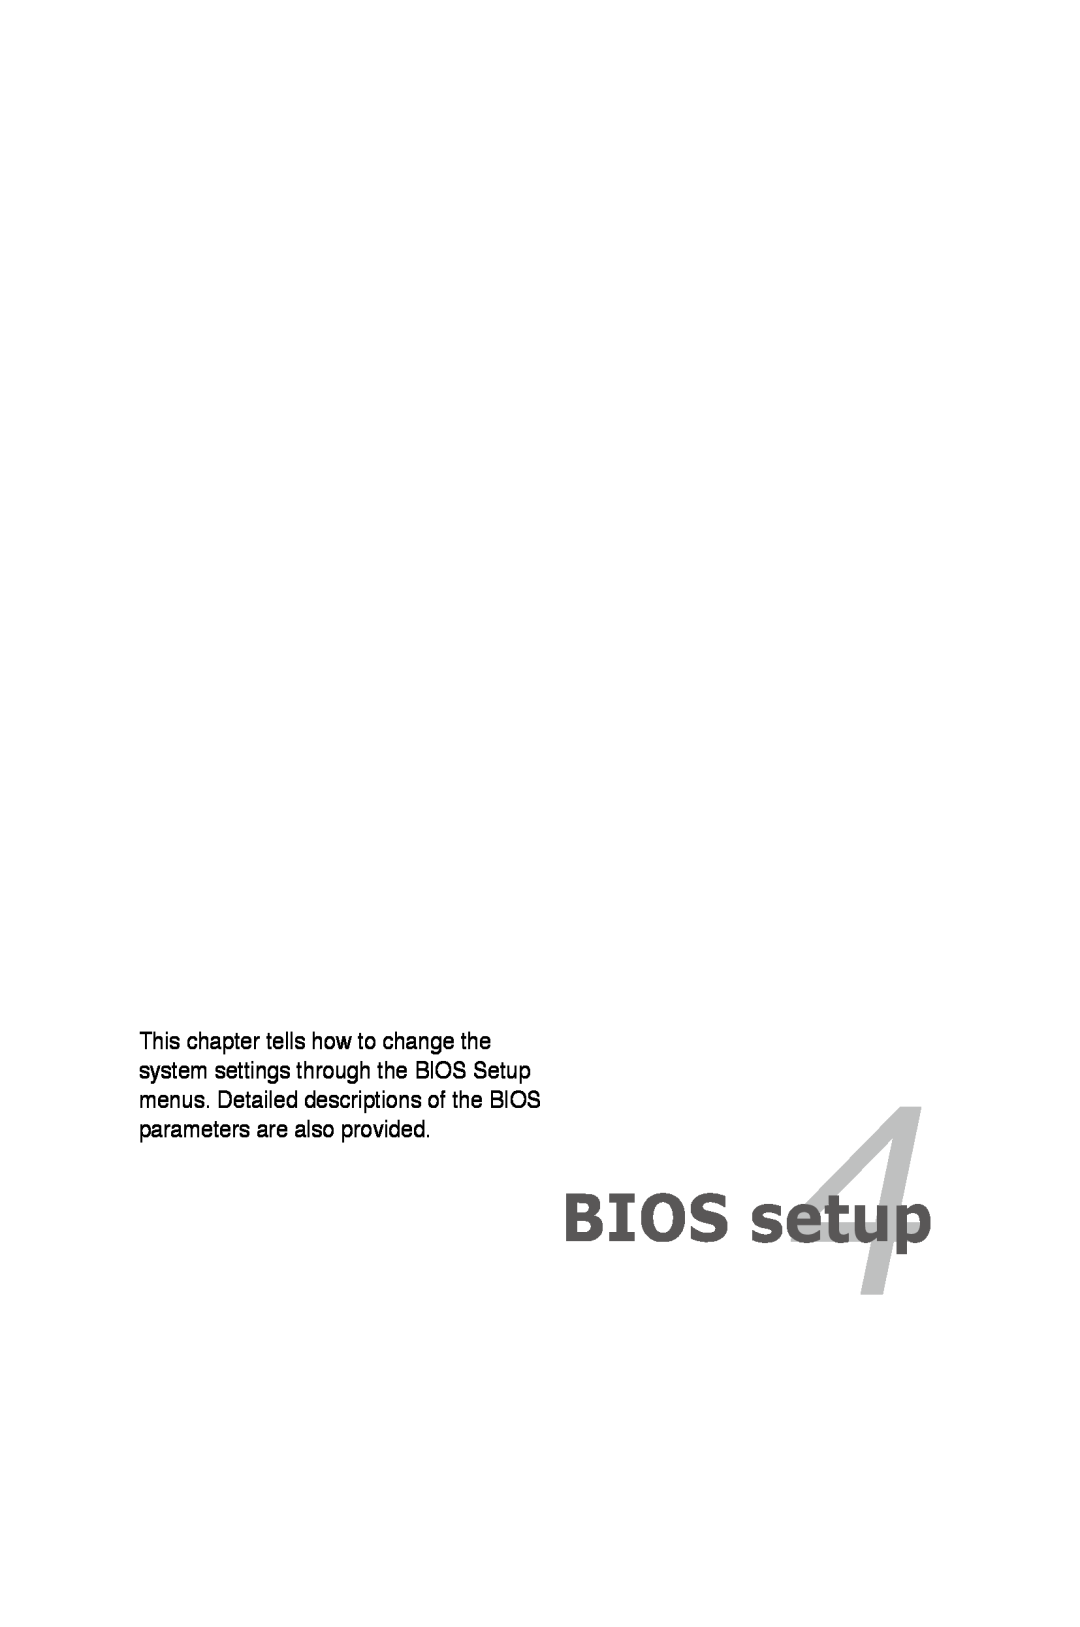 Asus Z7S WS manual BIOS setup, This chapter tells how to change the, parameters are also provided 